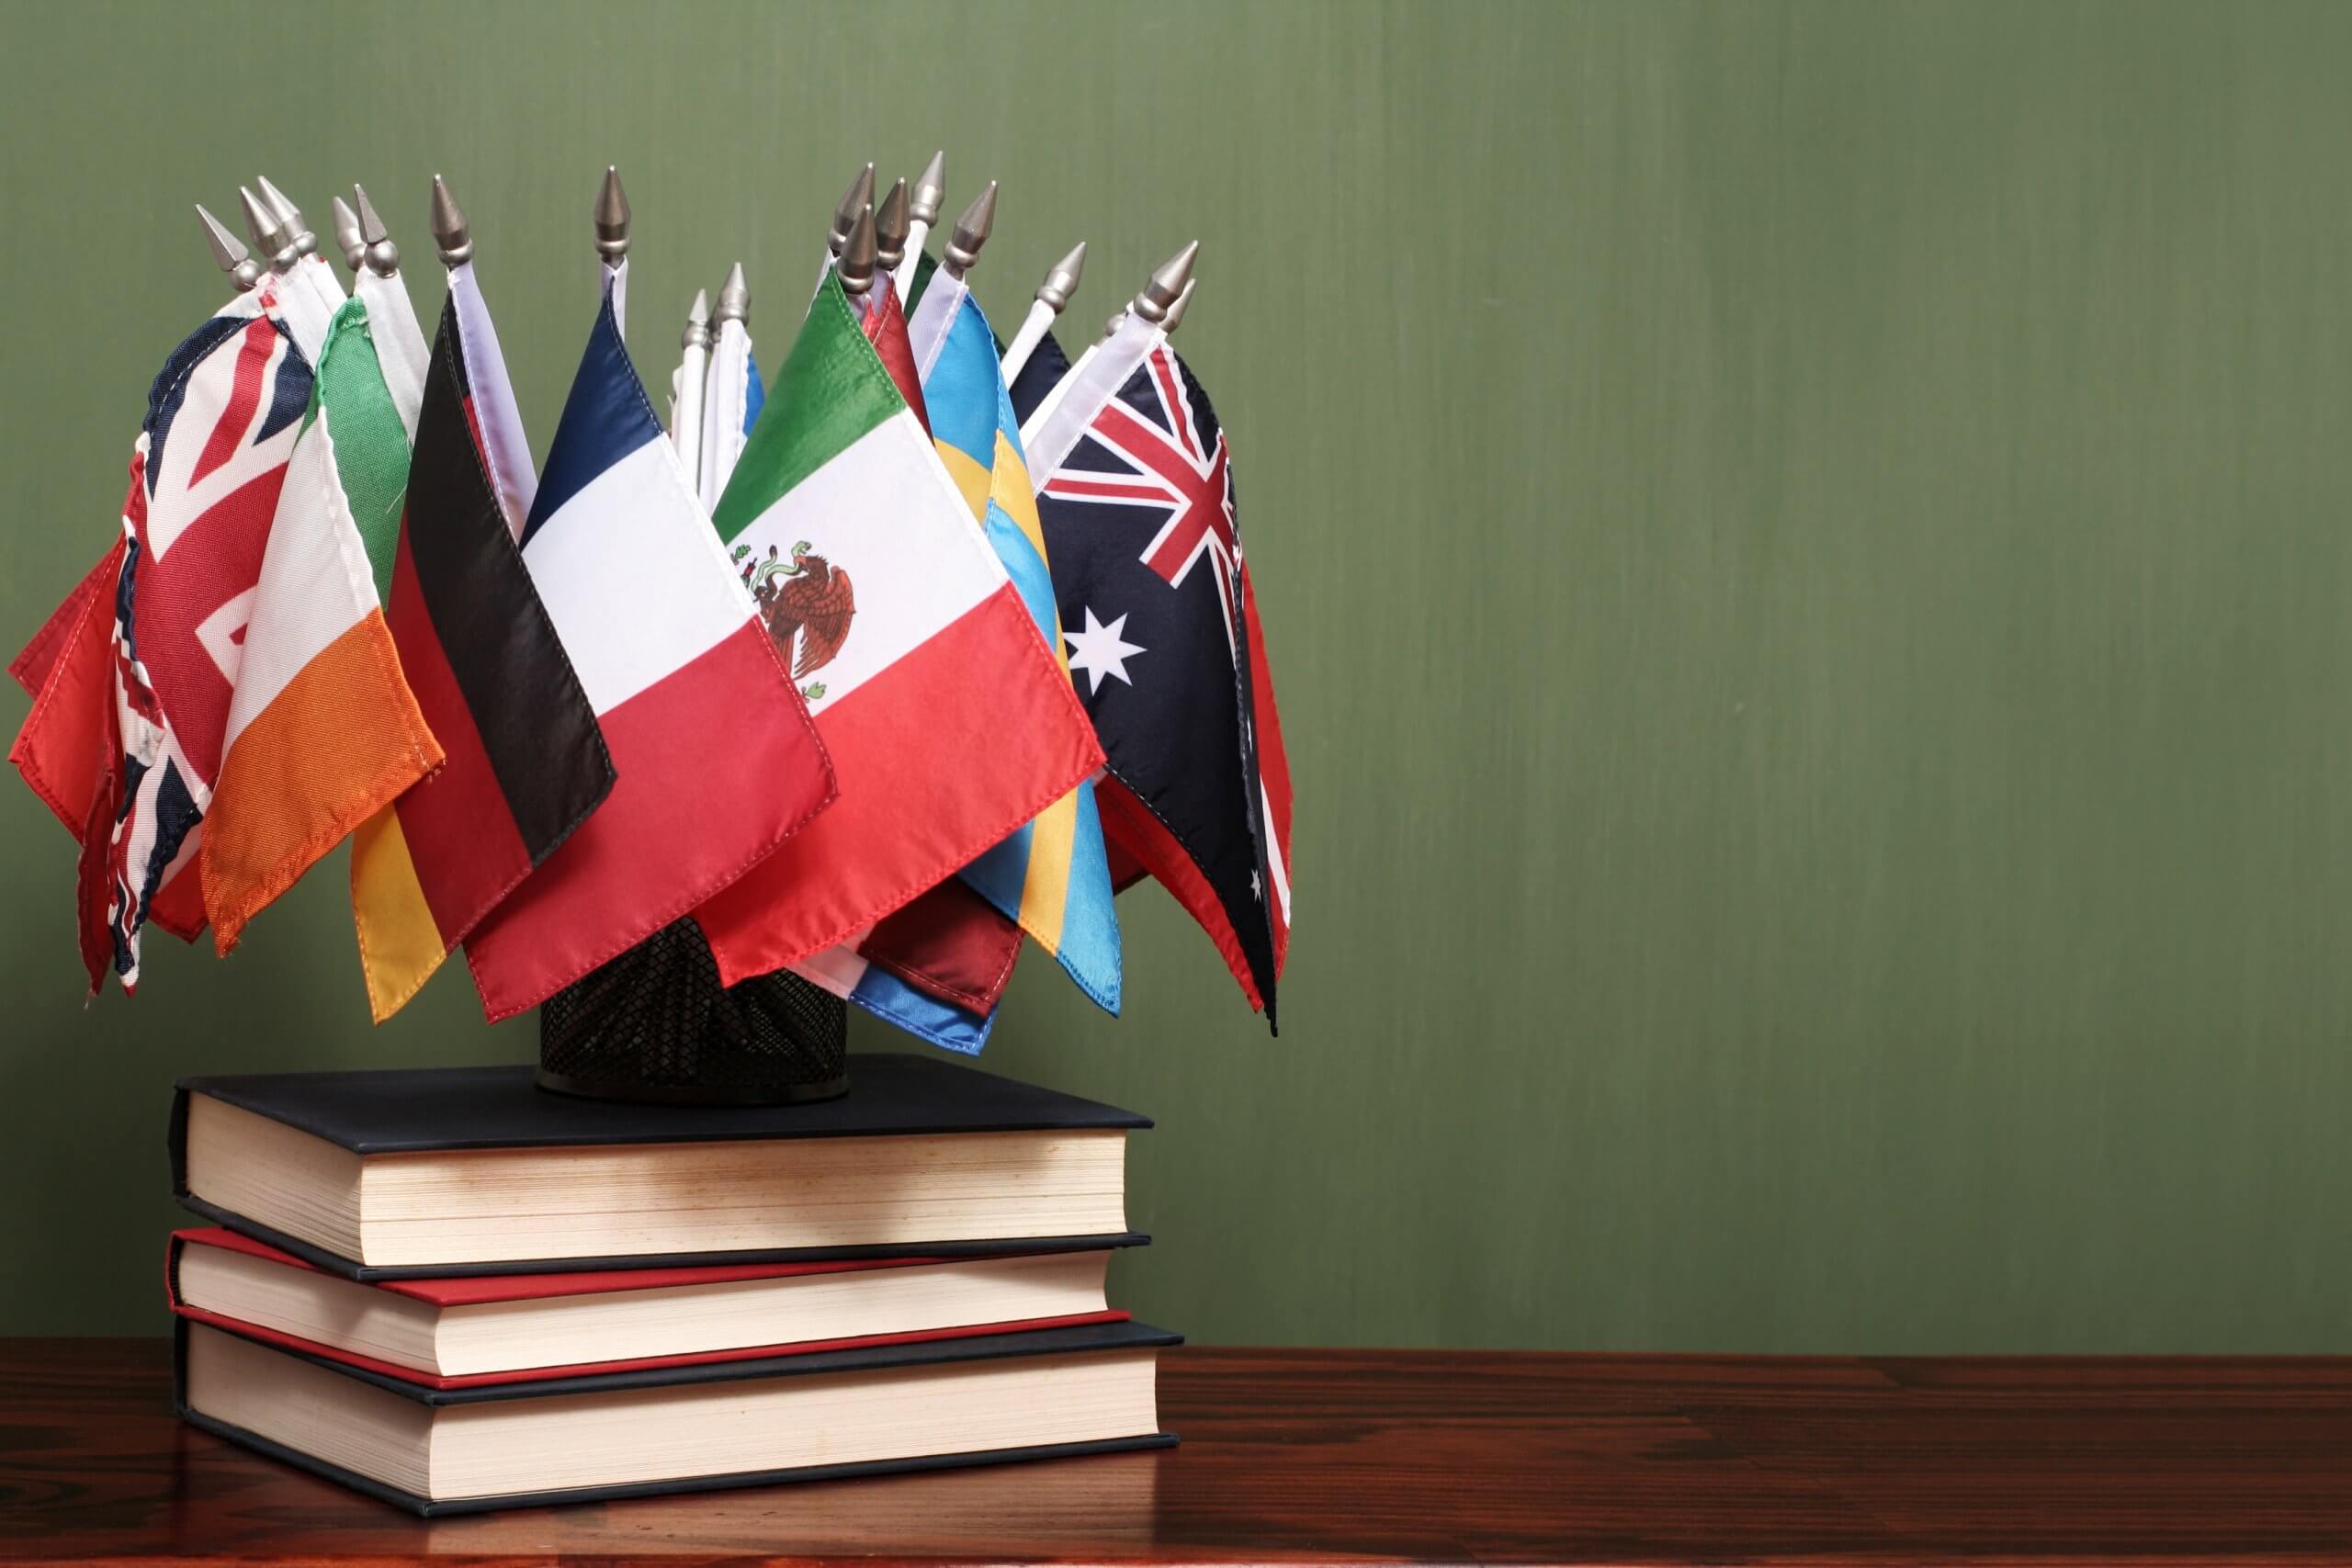 World flags on a pile of books in front of a green chalkboard